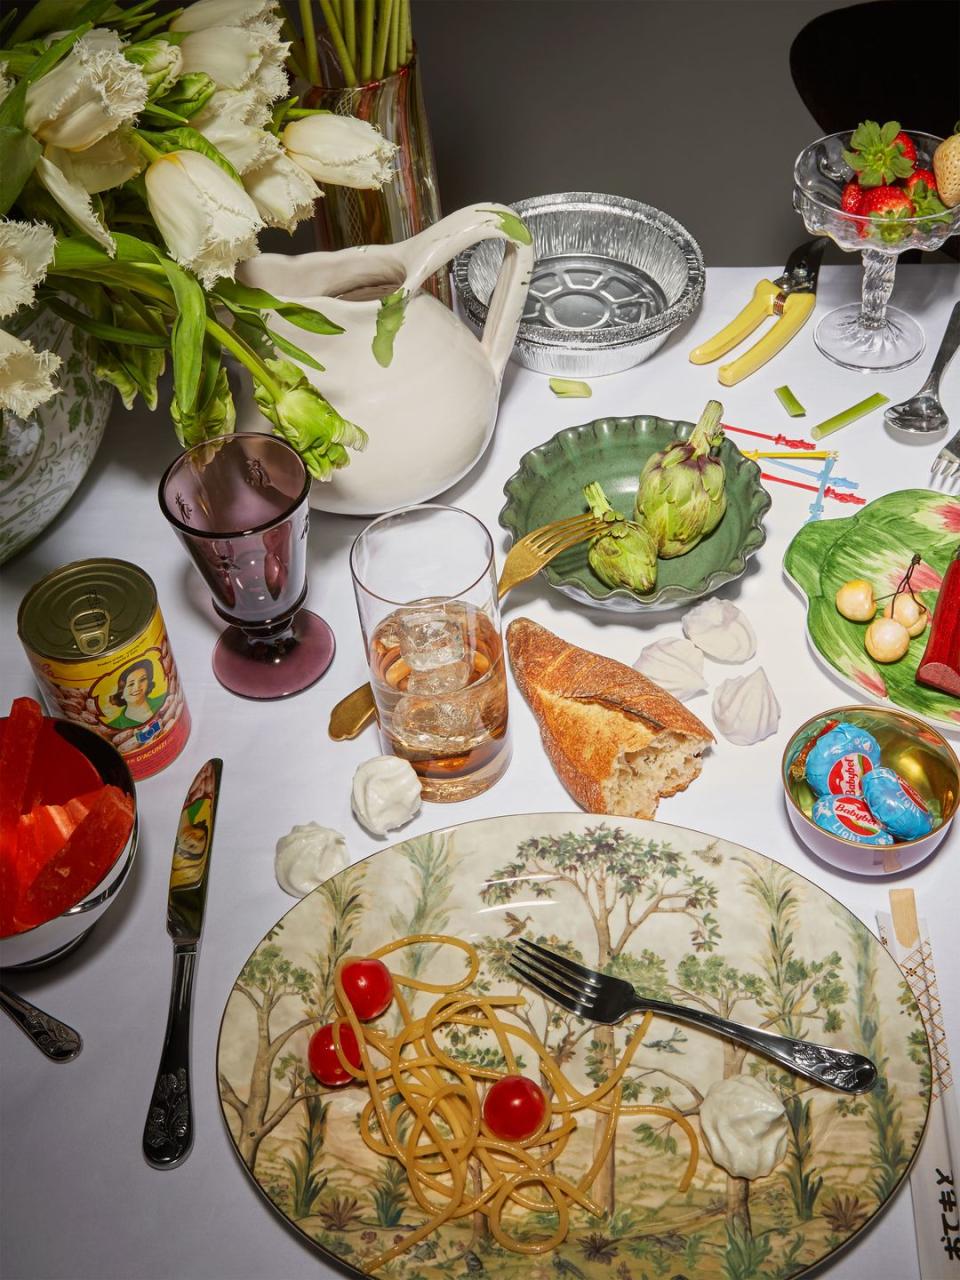 a table is filled with food and plates of all colors and sizes and some silverware and glassware and a white pitcher with faded white tulips